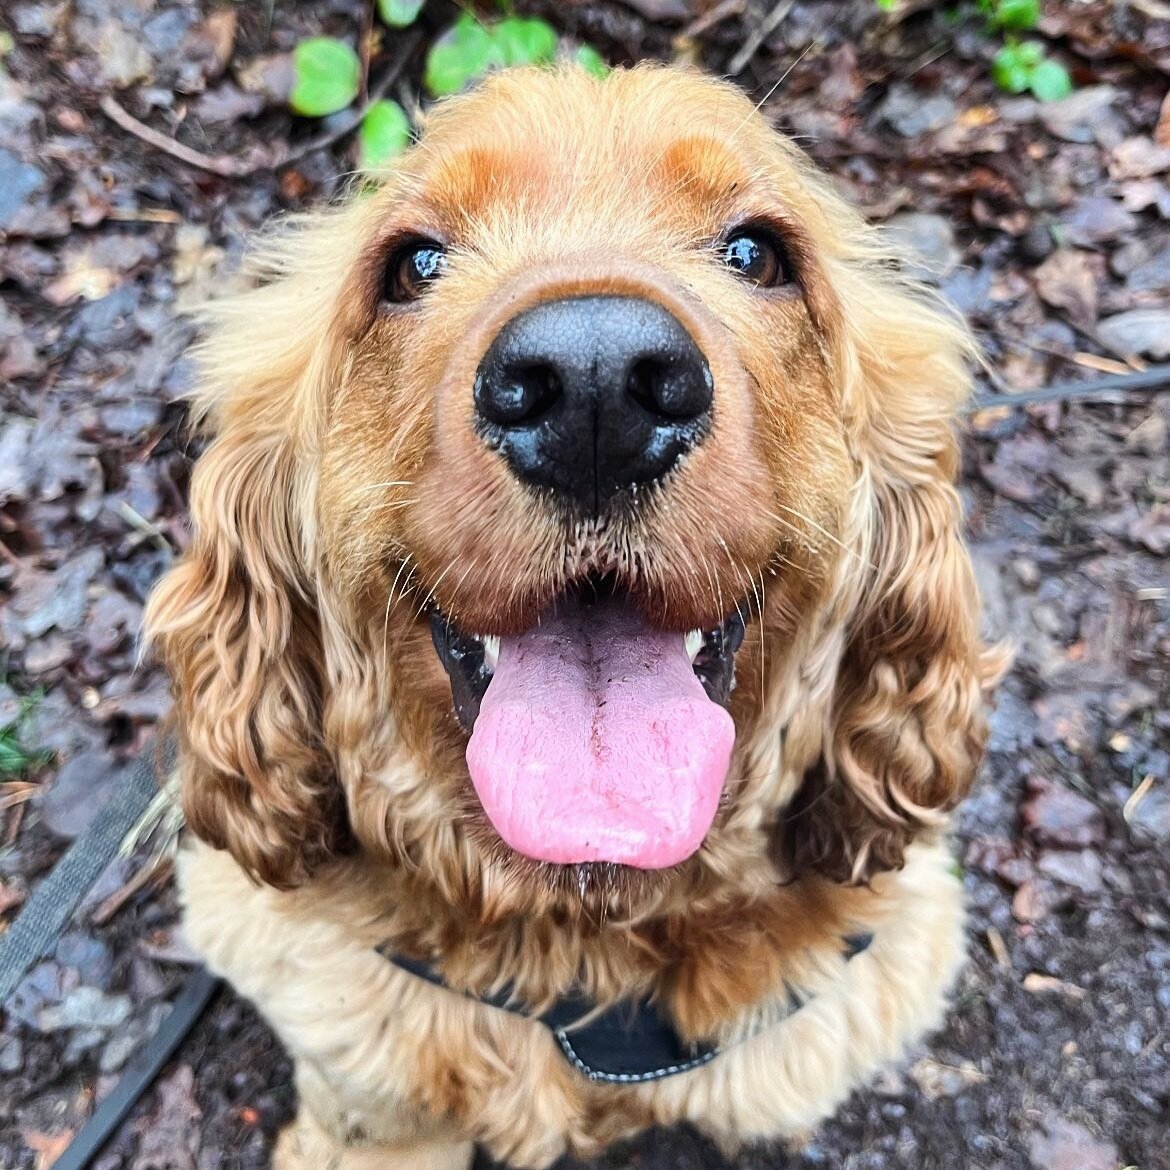 Stop it 🥺 how cute is this TOT! 😛 we really do have the most stunning doggies in our packs!